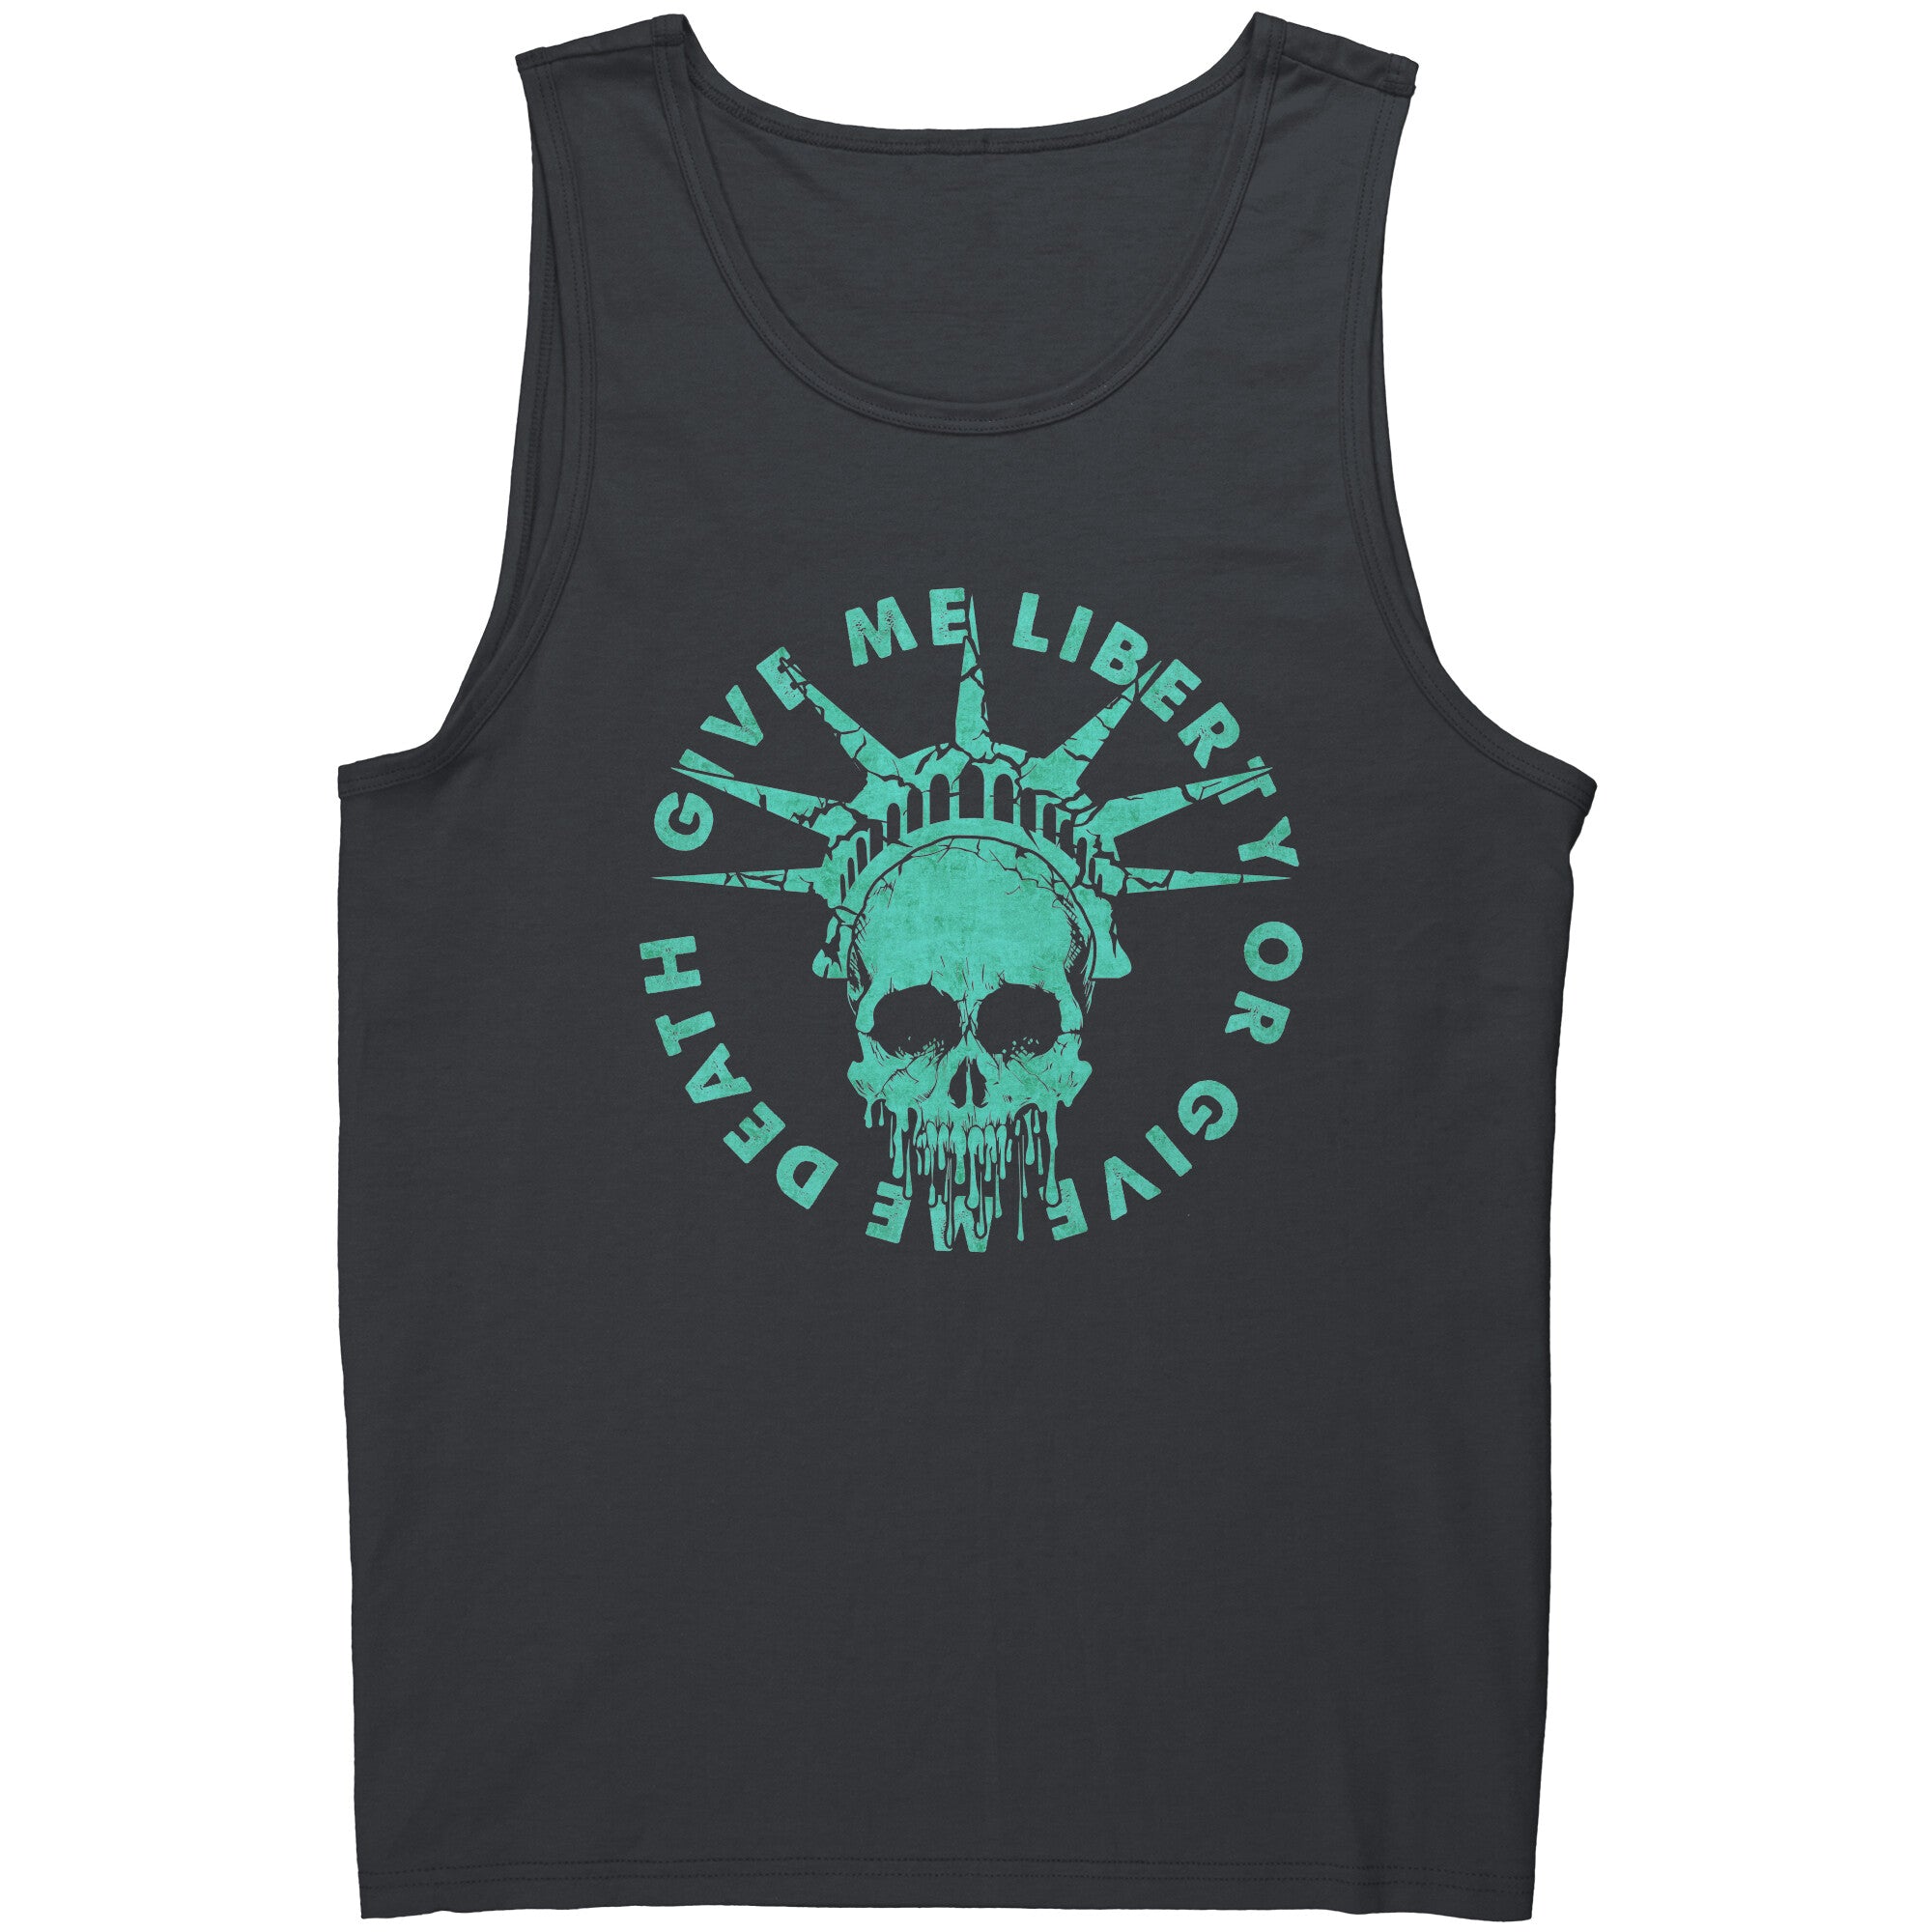 Give Me Liberty Or Give Me Death -Apparel | Drunk America 